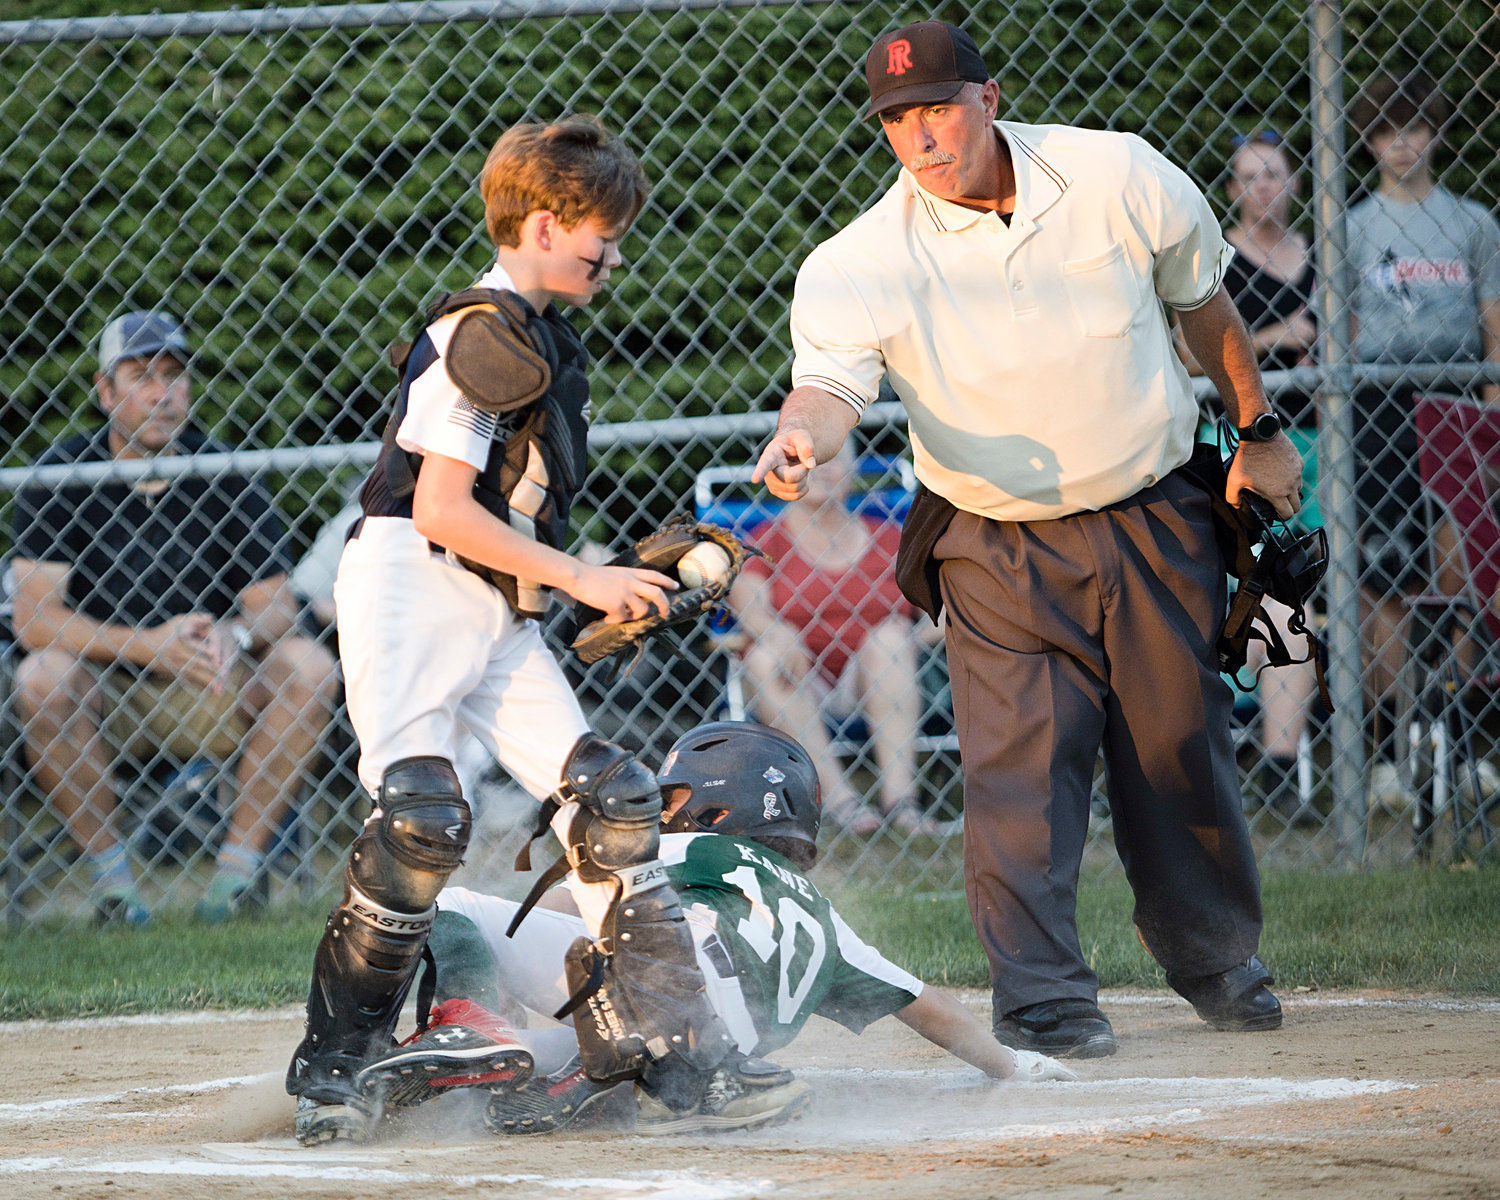 Zane Paller makes sure he has the ball while tagging a Cranston East runner out at home plate.